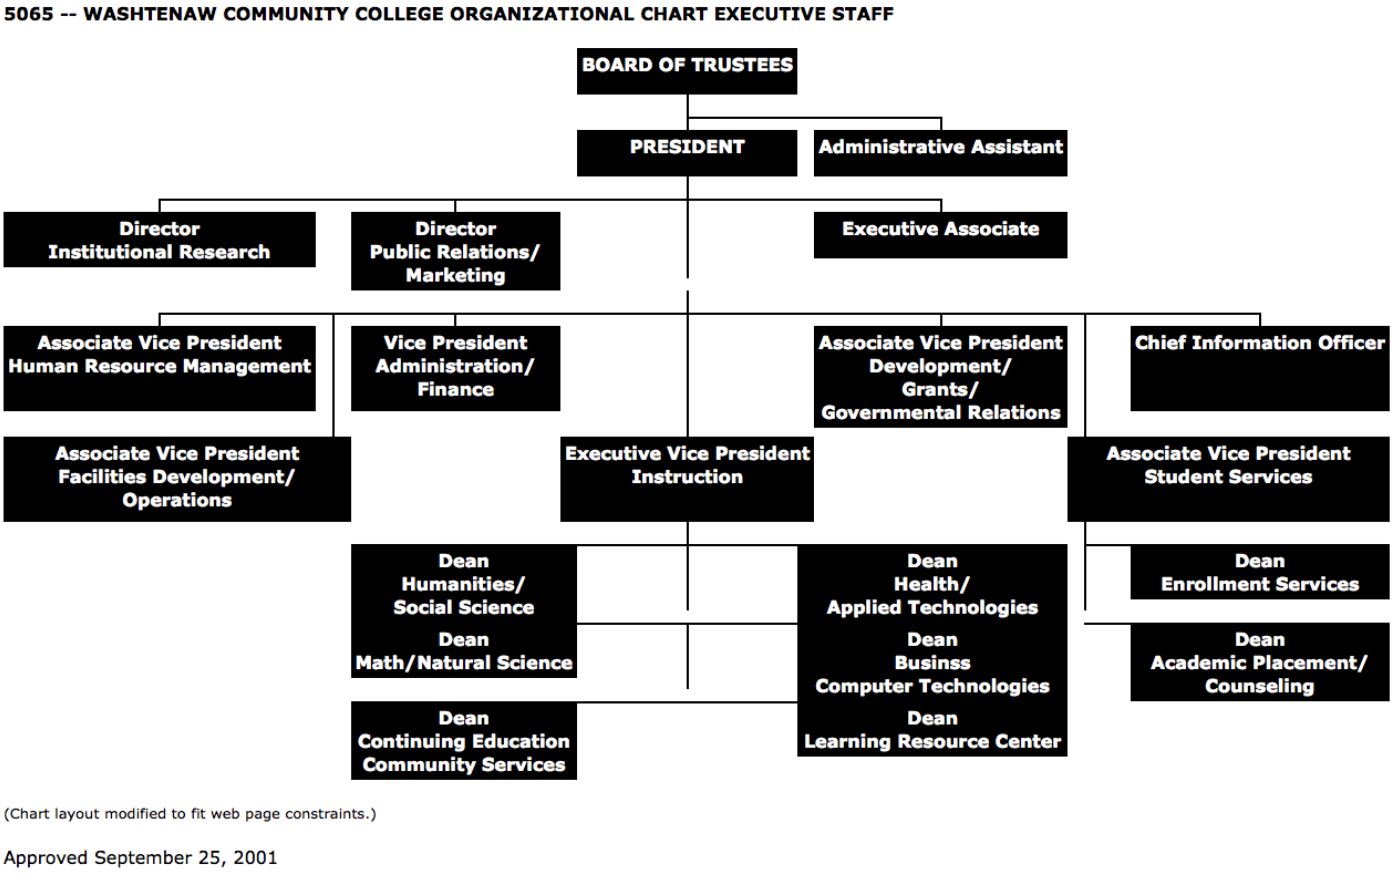 Abandoned Org Chart Suggests an Executive Staff Policy